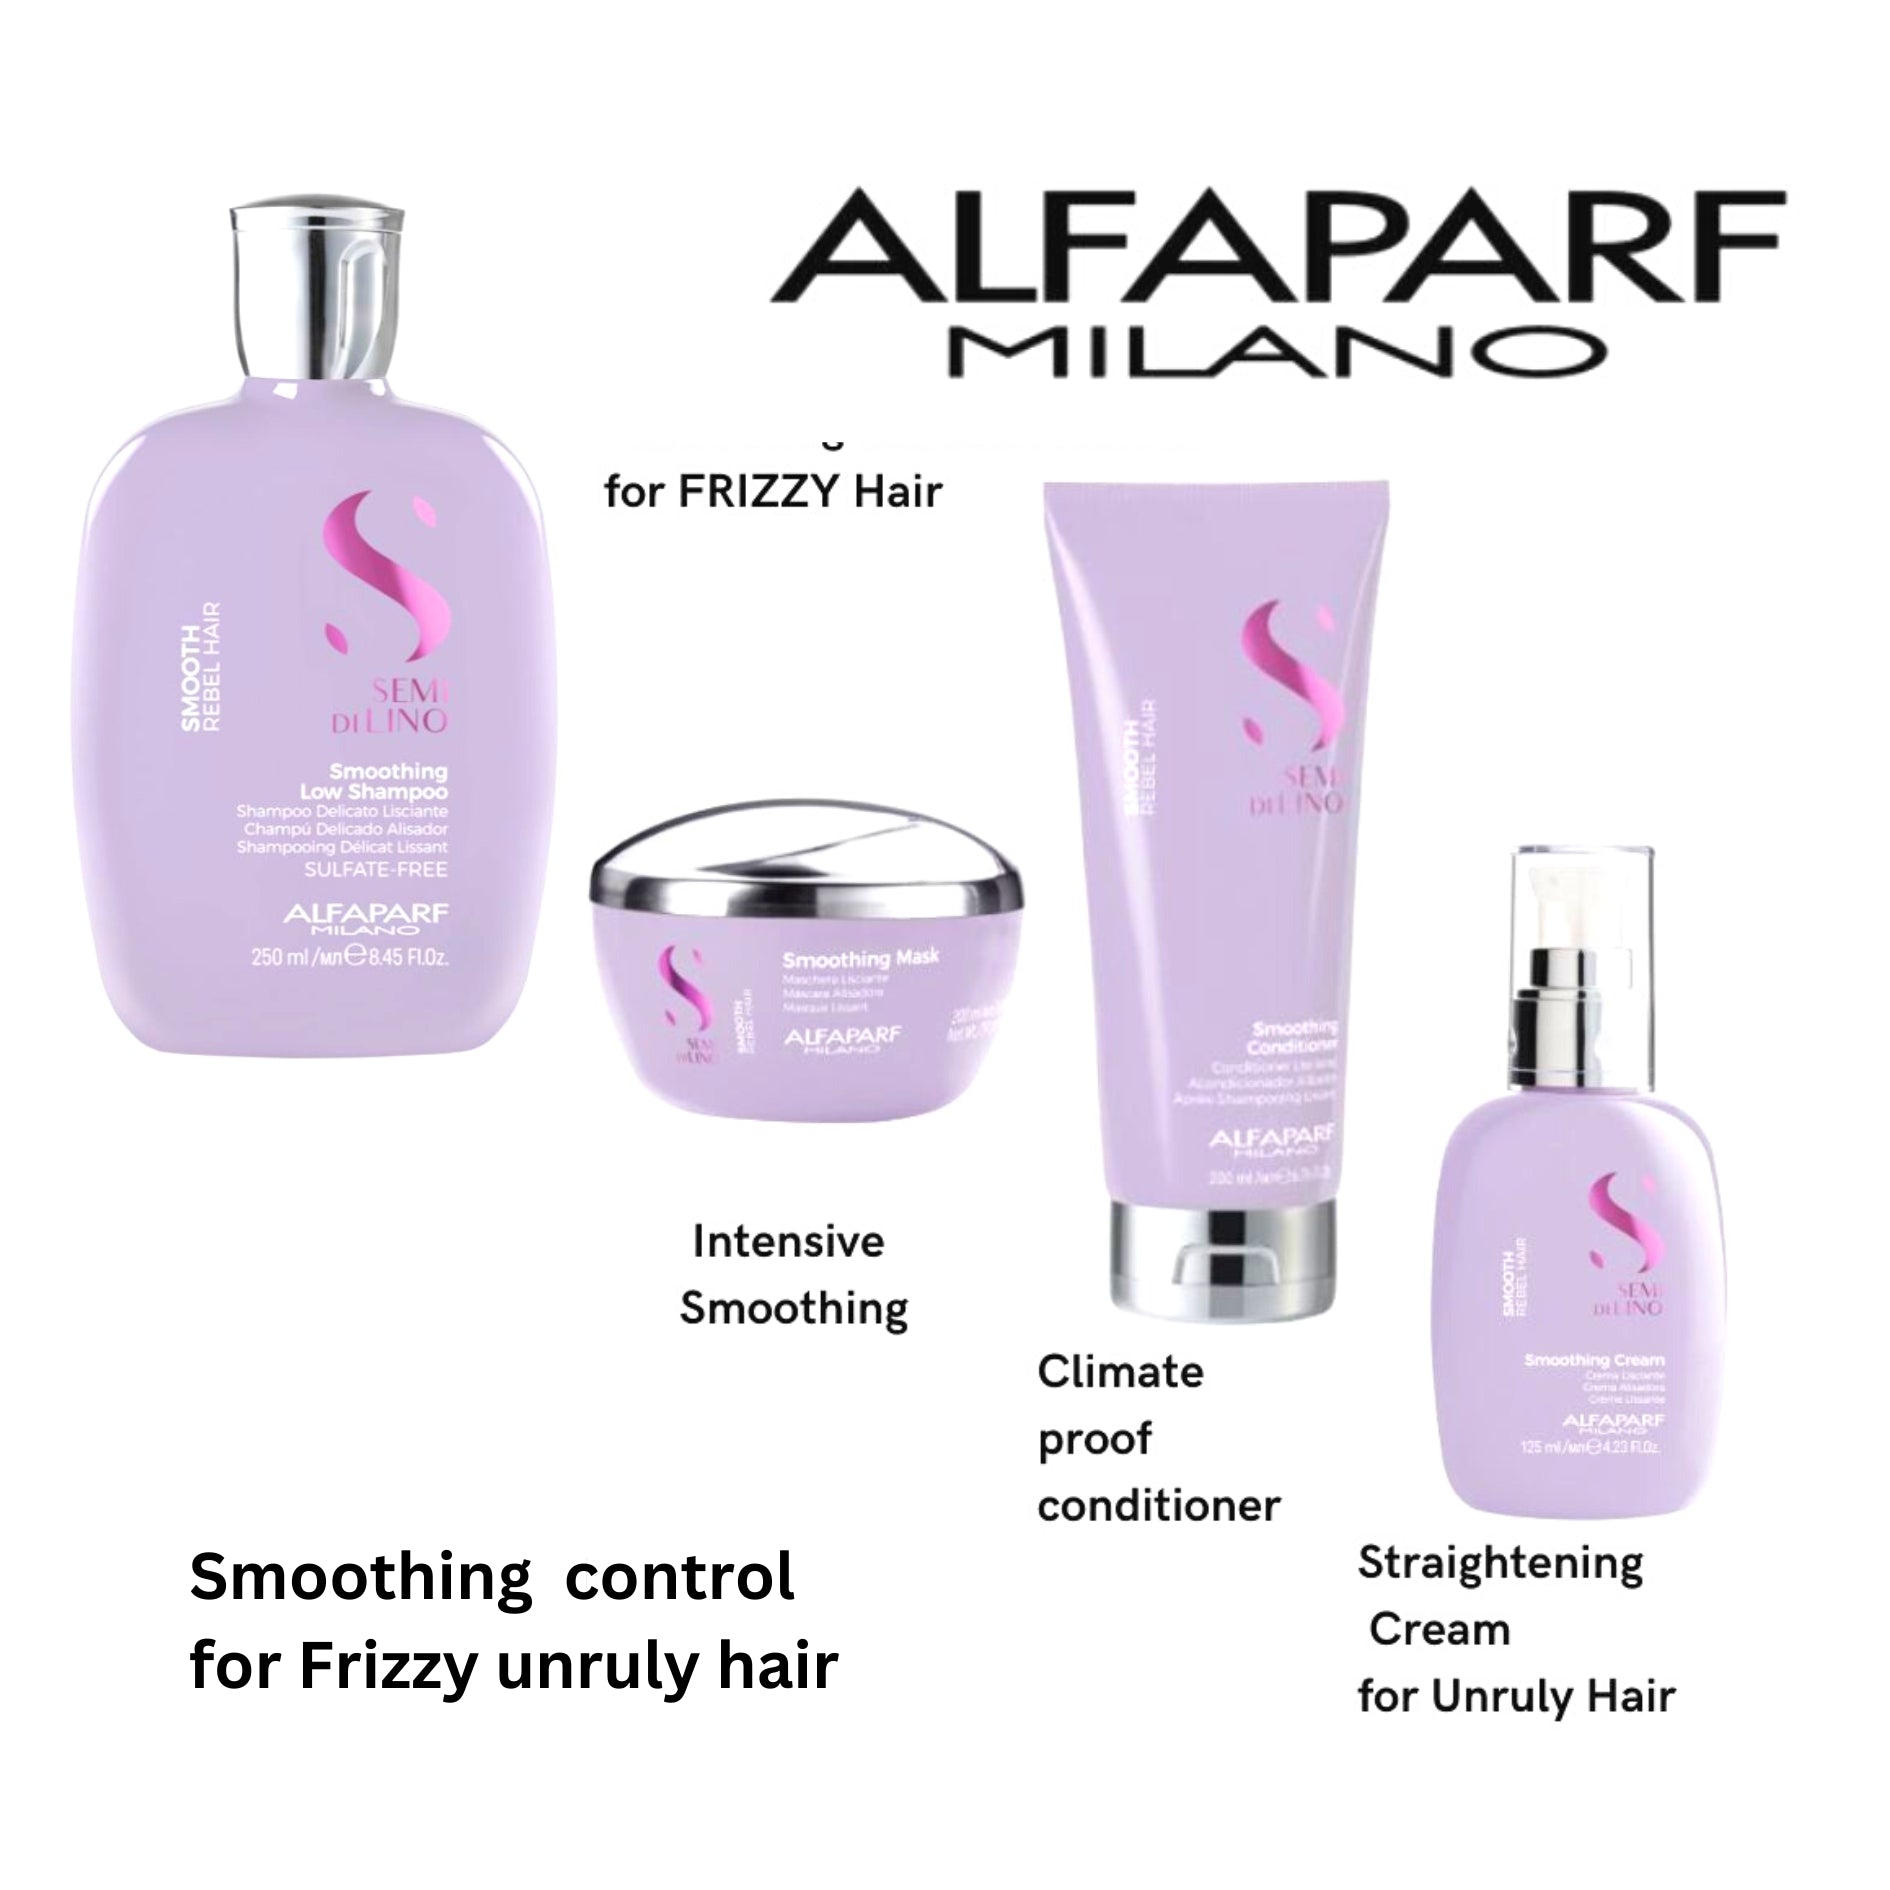 alfaparf smoothing shampoo mask conditioner and cream for frizzy and unruly hair at mylook.ie